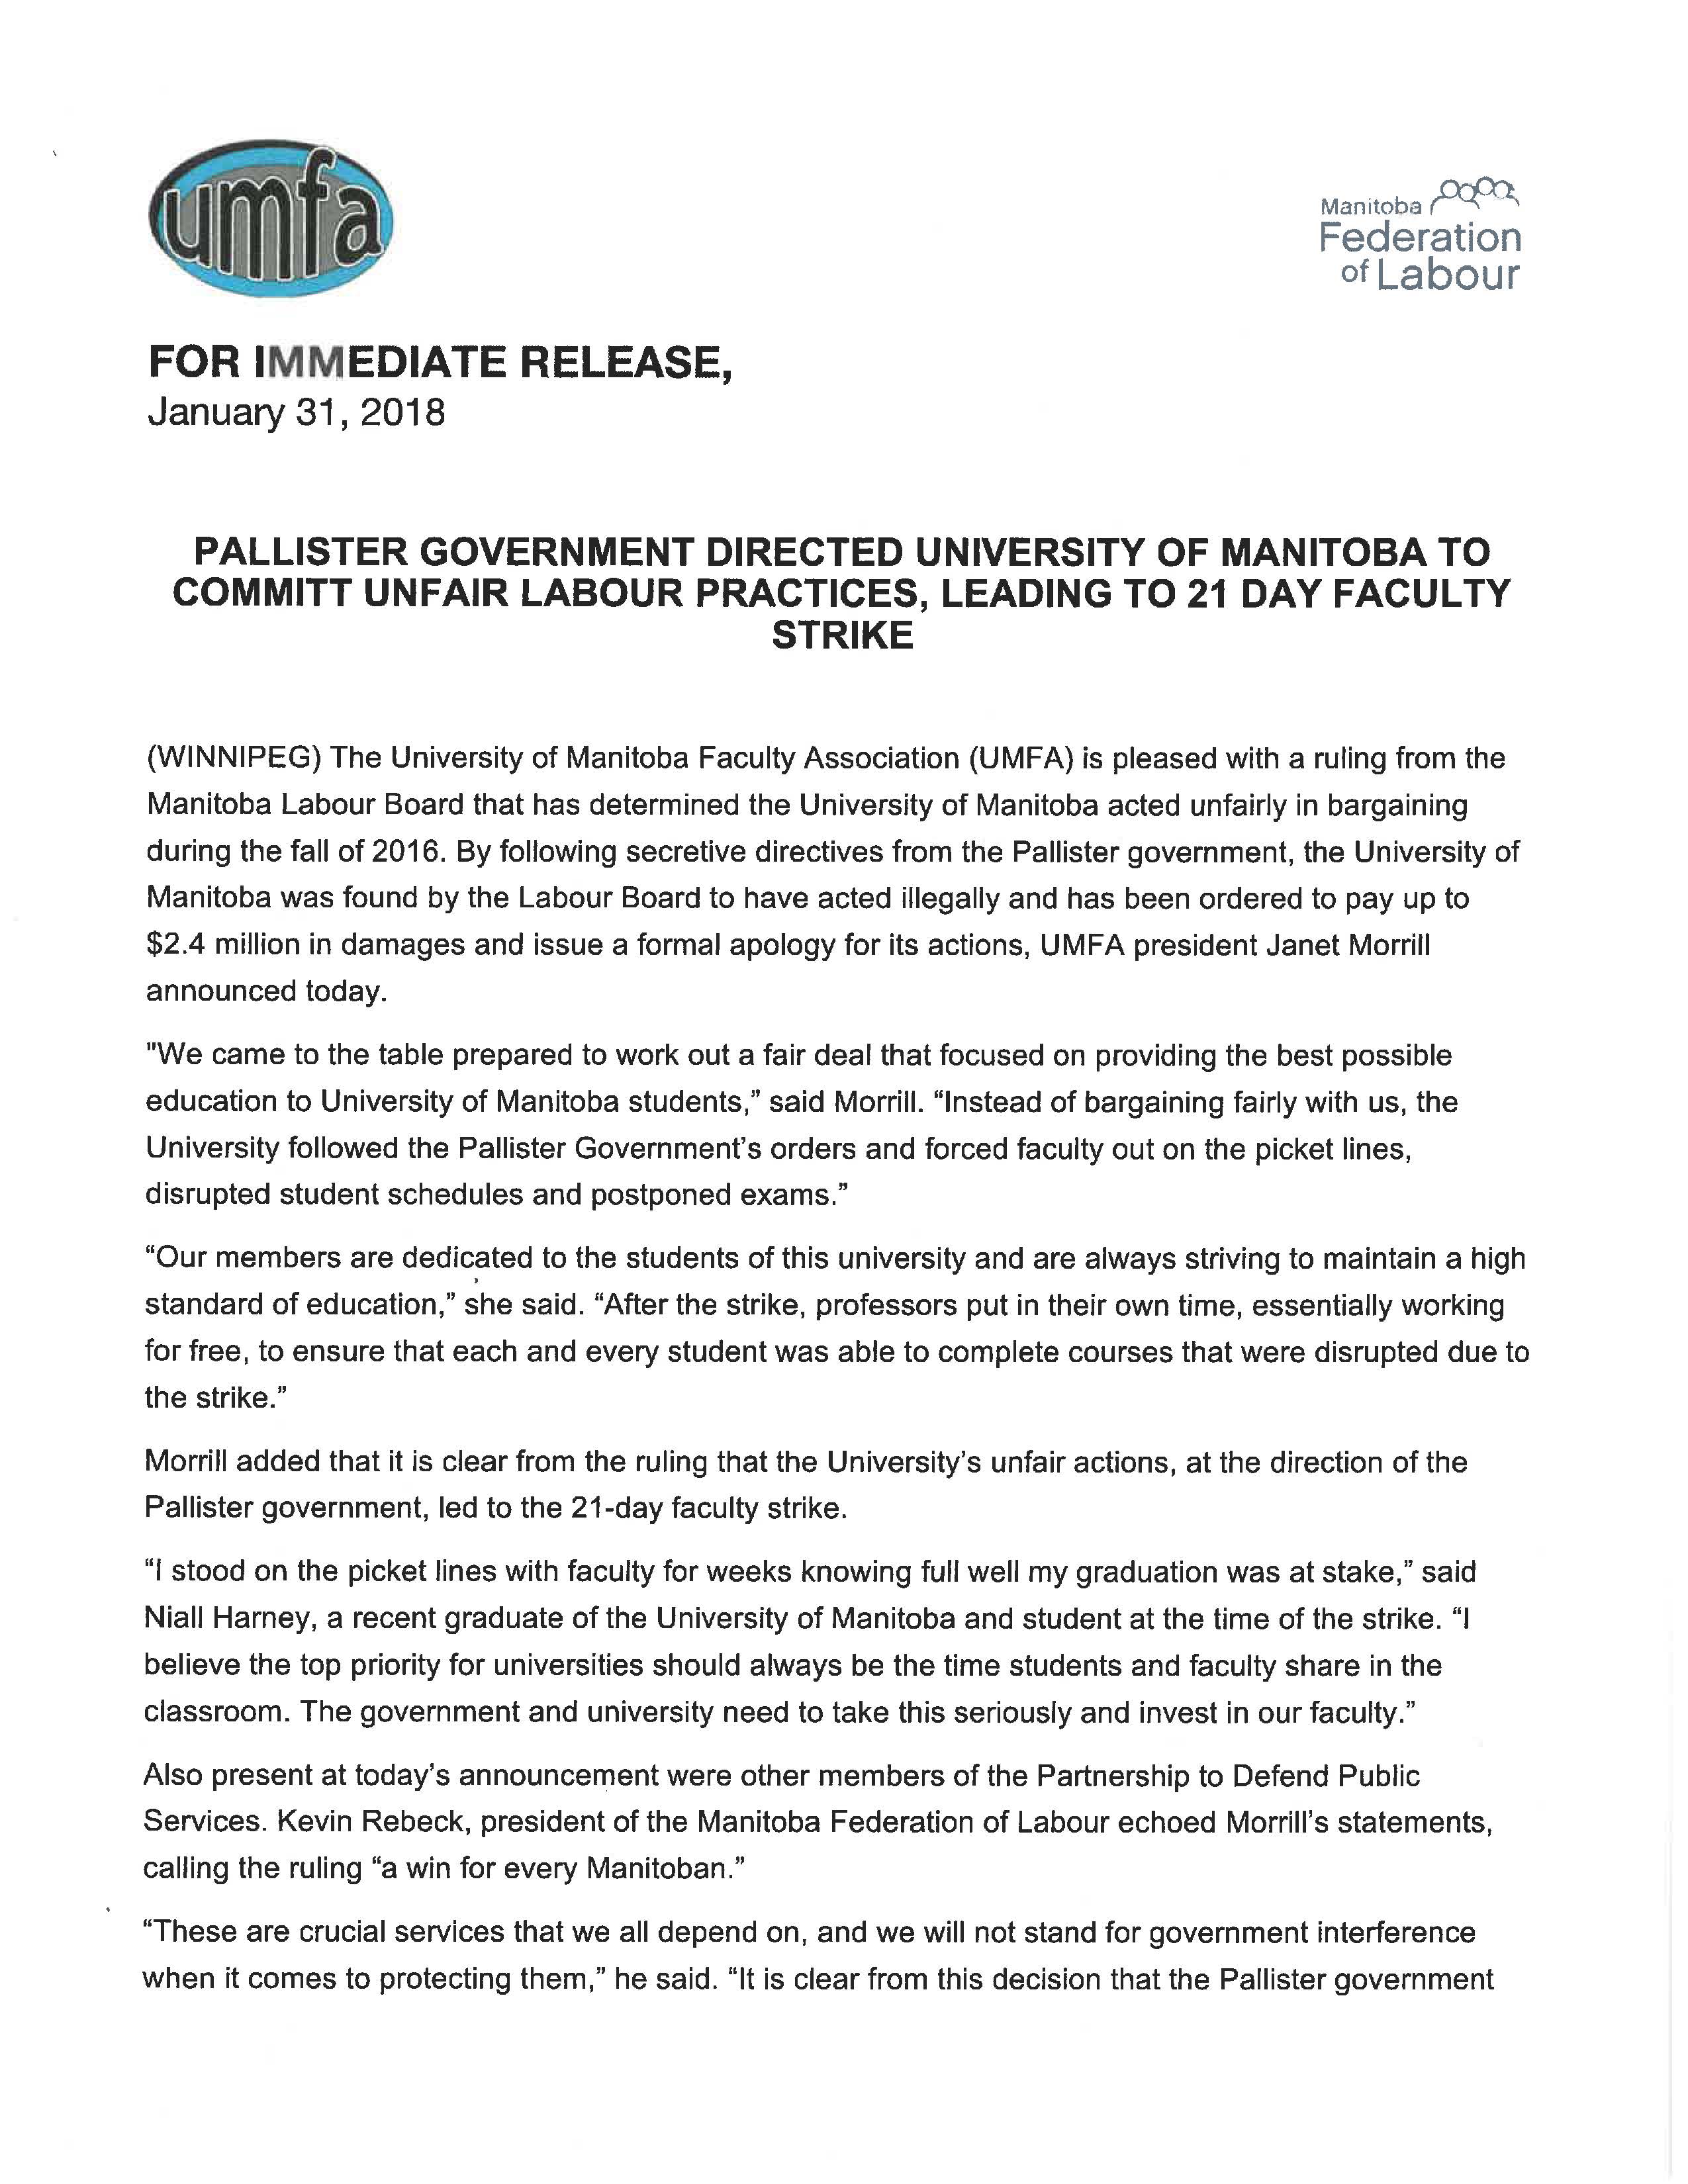 ULP Press Release Page 1